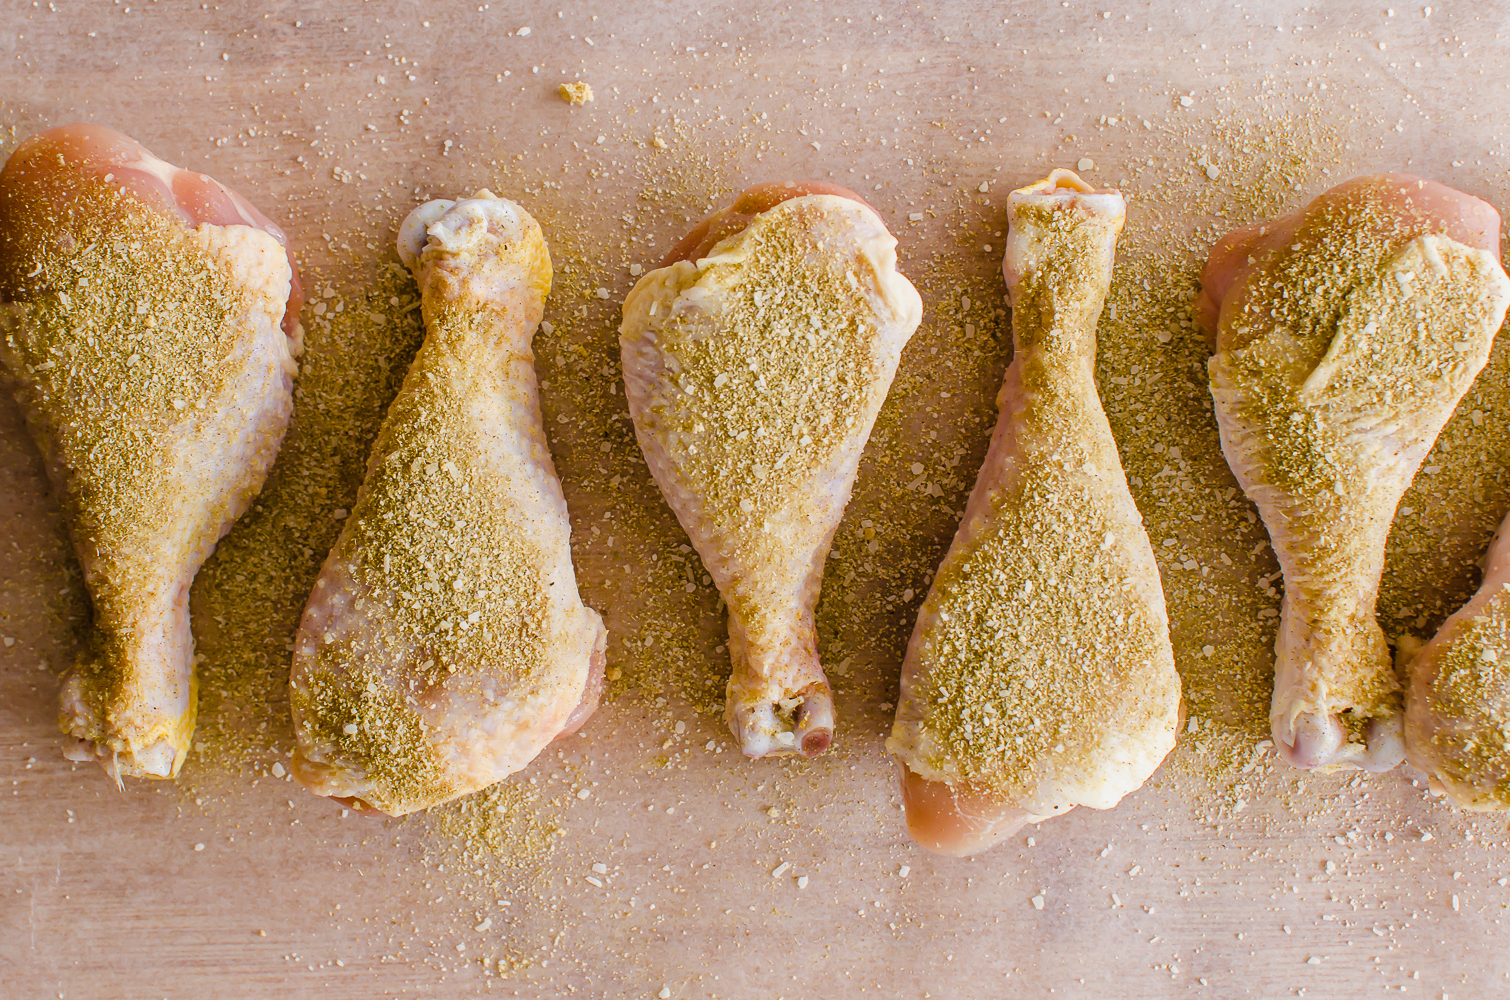 Seasoned chicken drumsticks lined up on a cutting board.